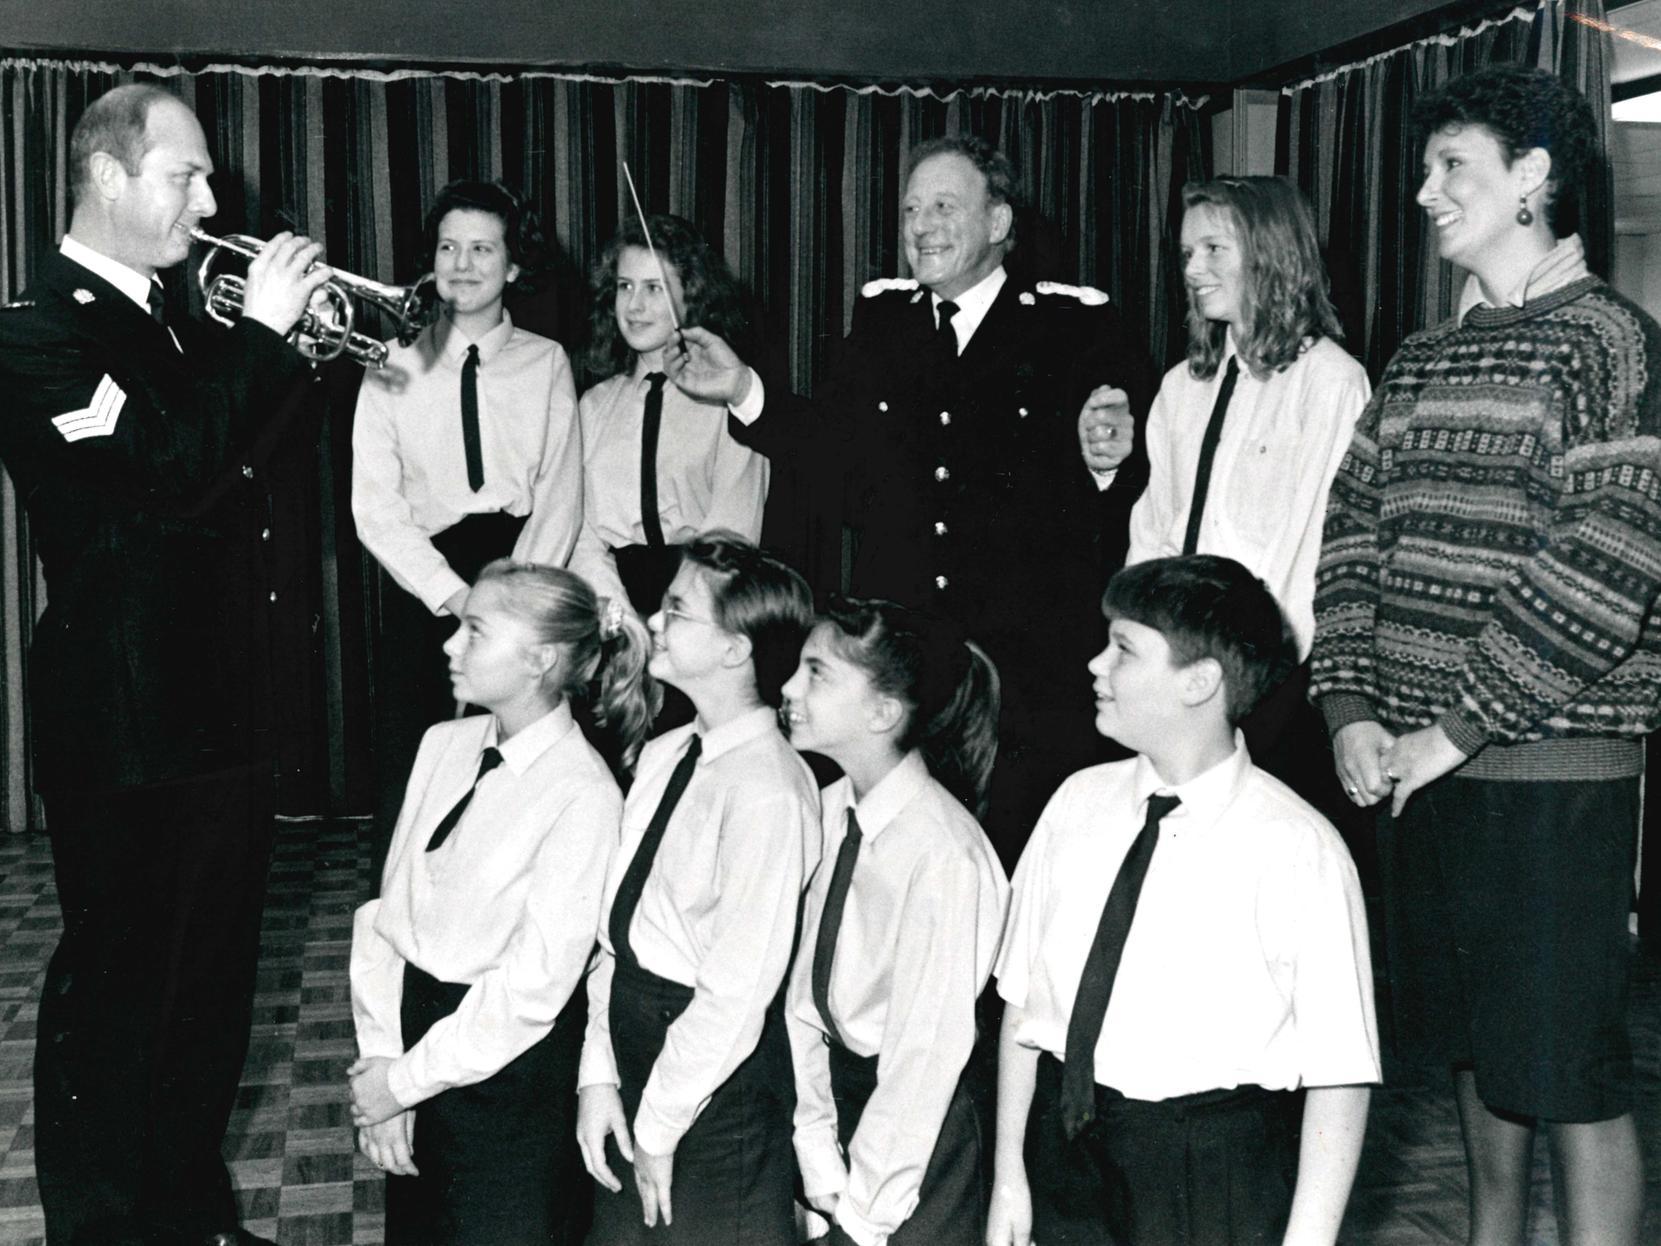 Outwood Grange School, pre Christmas concert with school choir and the West Yorkshire Police Band, 1991.